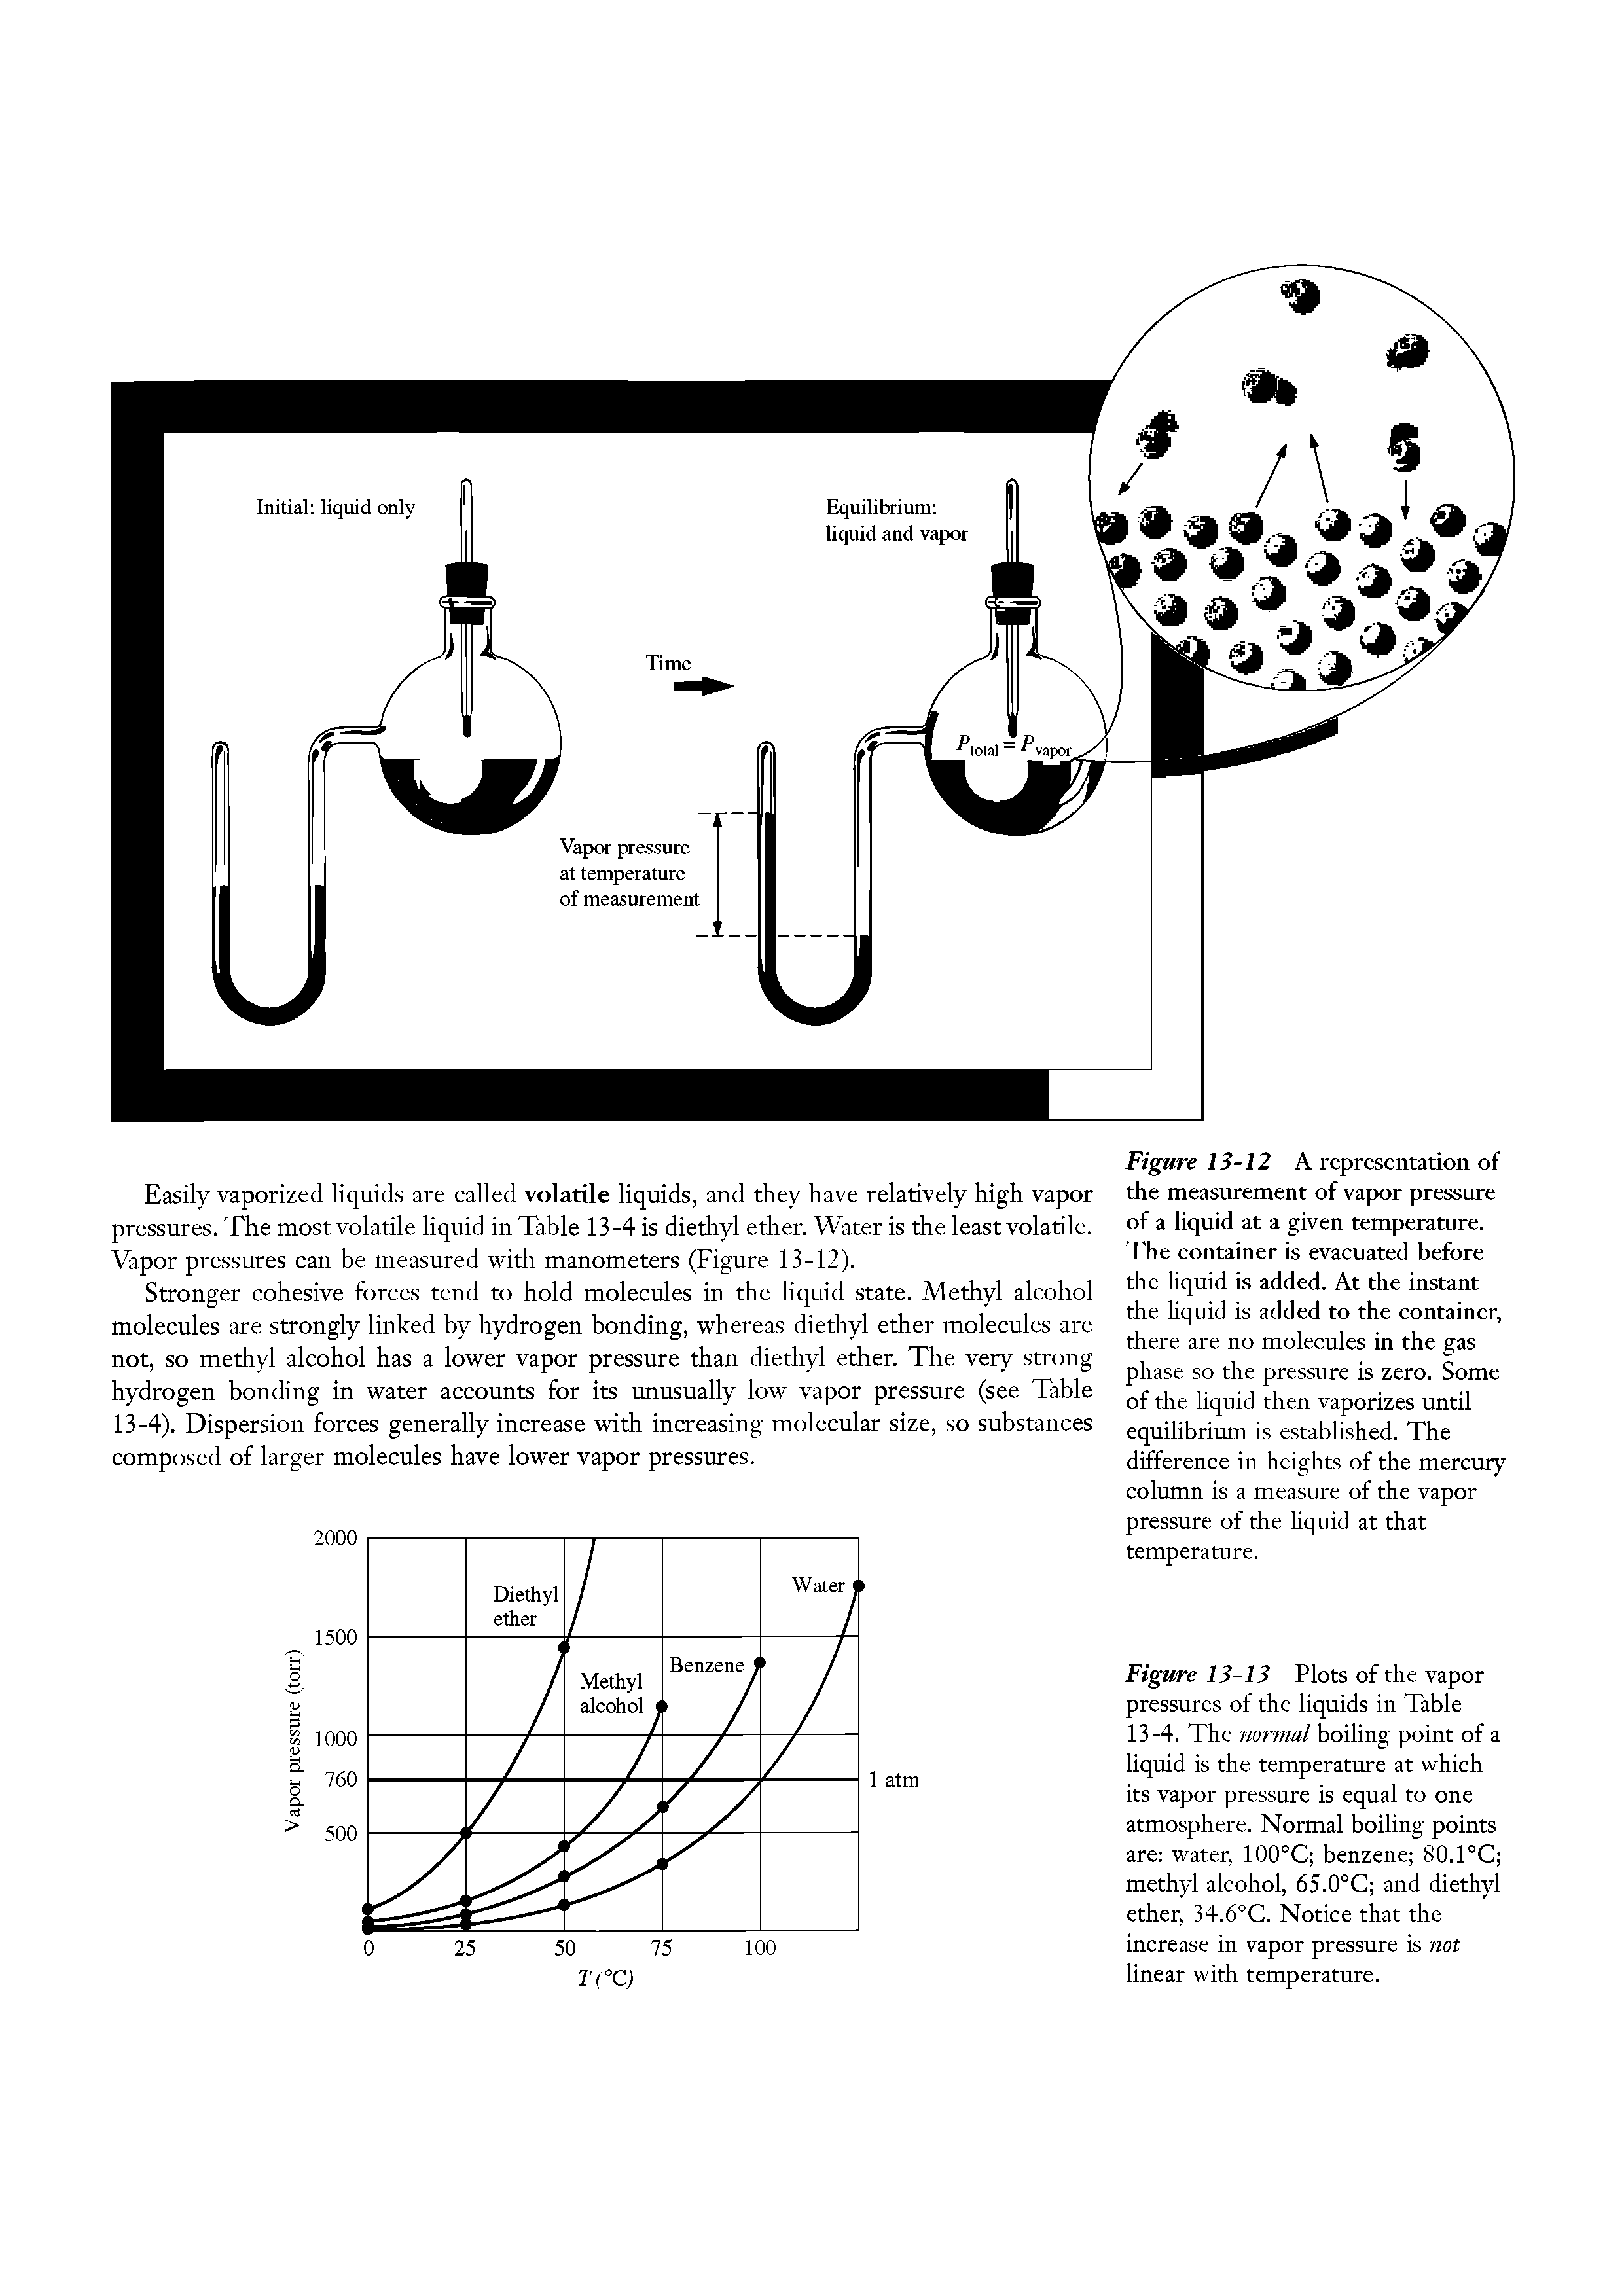 Figure 13-12 A representation of the measurement of vapor pressure of a liquid at a given temperature. The container is evacuated before the liquid is added. At the instant the liquid is added to the container, there are no molecules in the gas phase so the pressure is zero. Some of the liquid then vaporizes until equilibrium is established. The difference in heights of the mercury column is a measure of the vapor pressure of the liquid at that temperature.